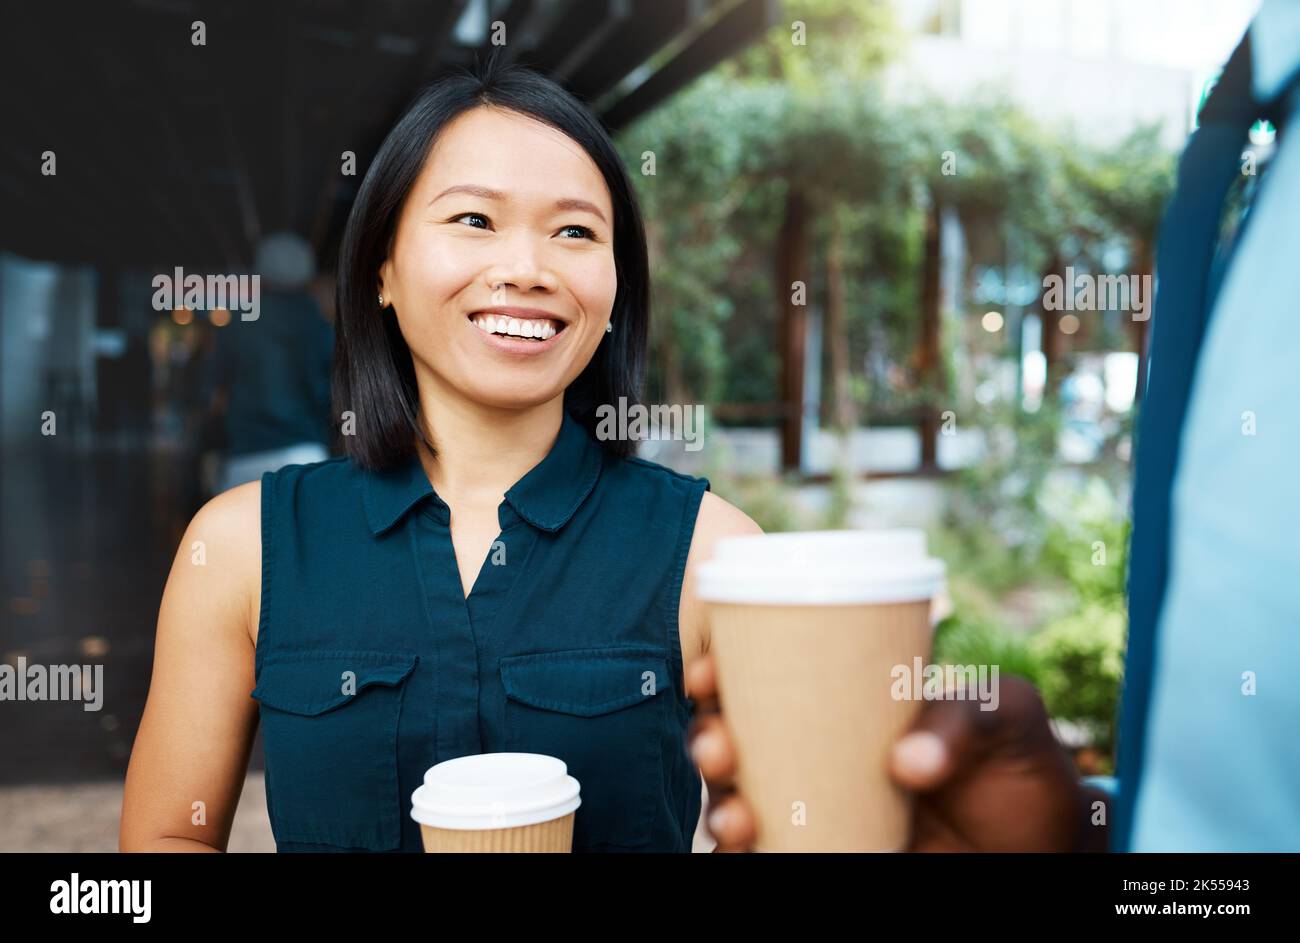 Coffee, communication and Asian woman and black man in city, conversation or talking while drinking espresso. Tea, chatting and business people Stock Photo